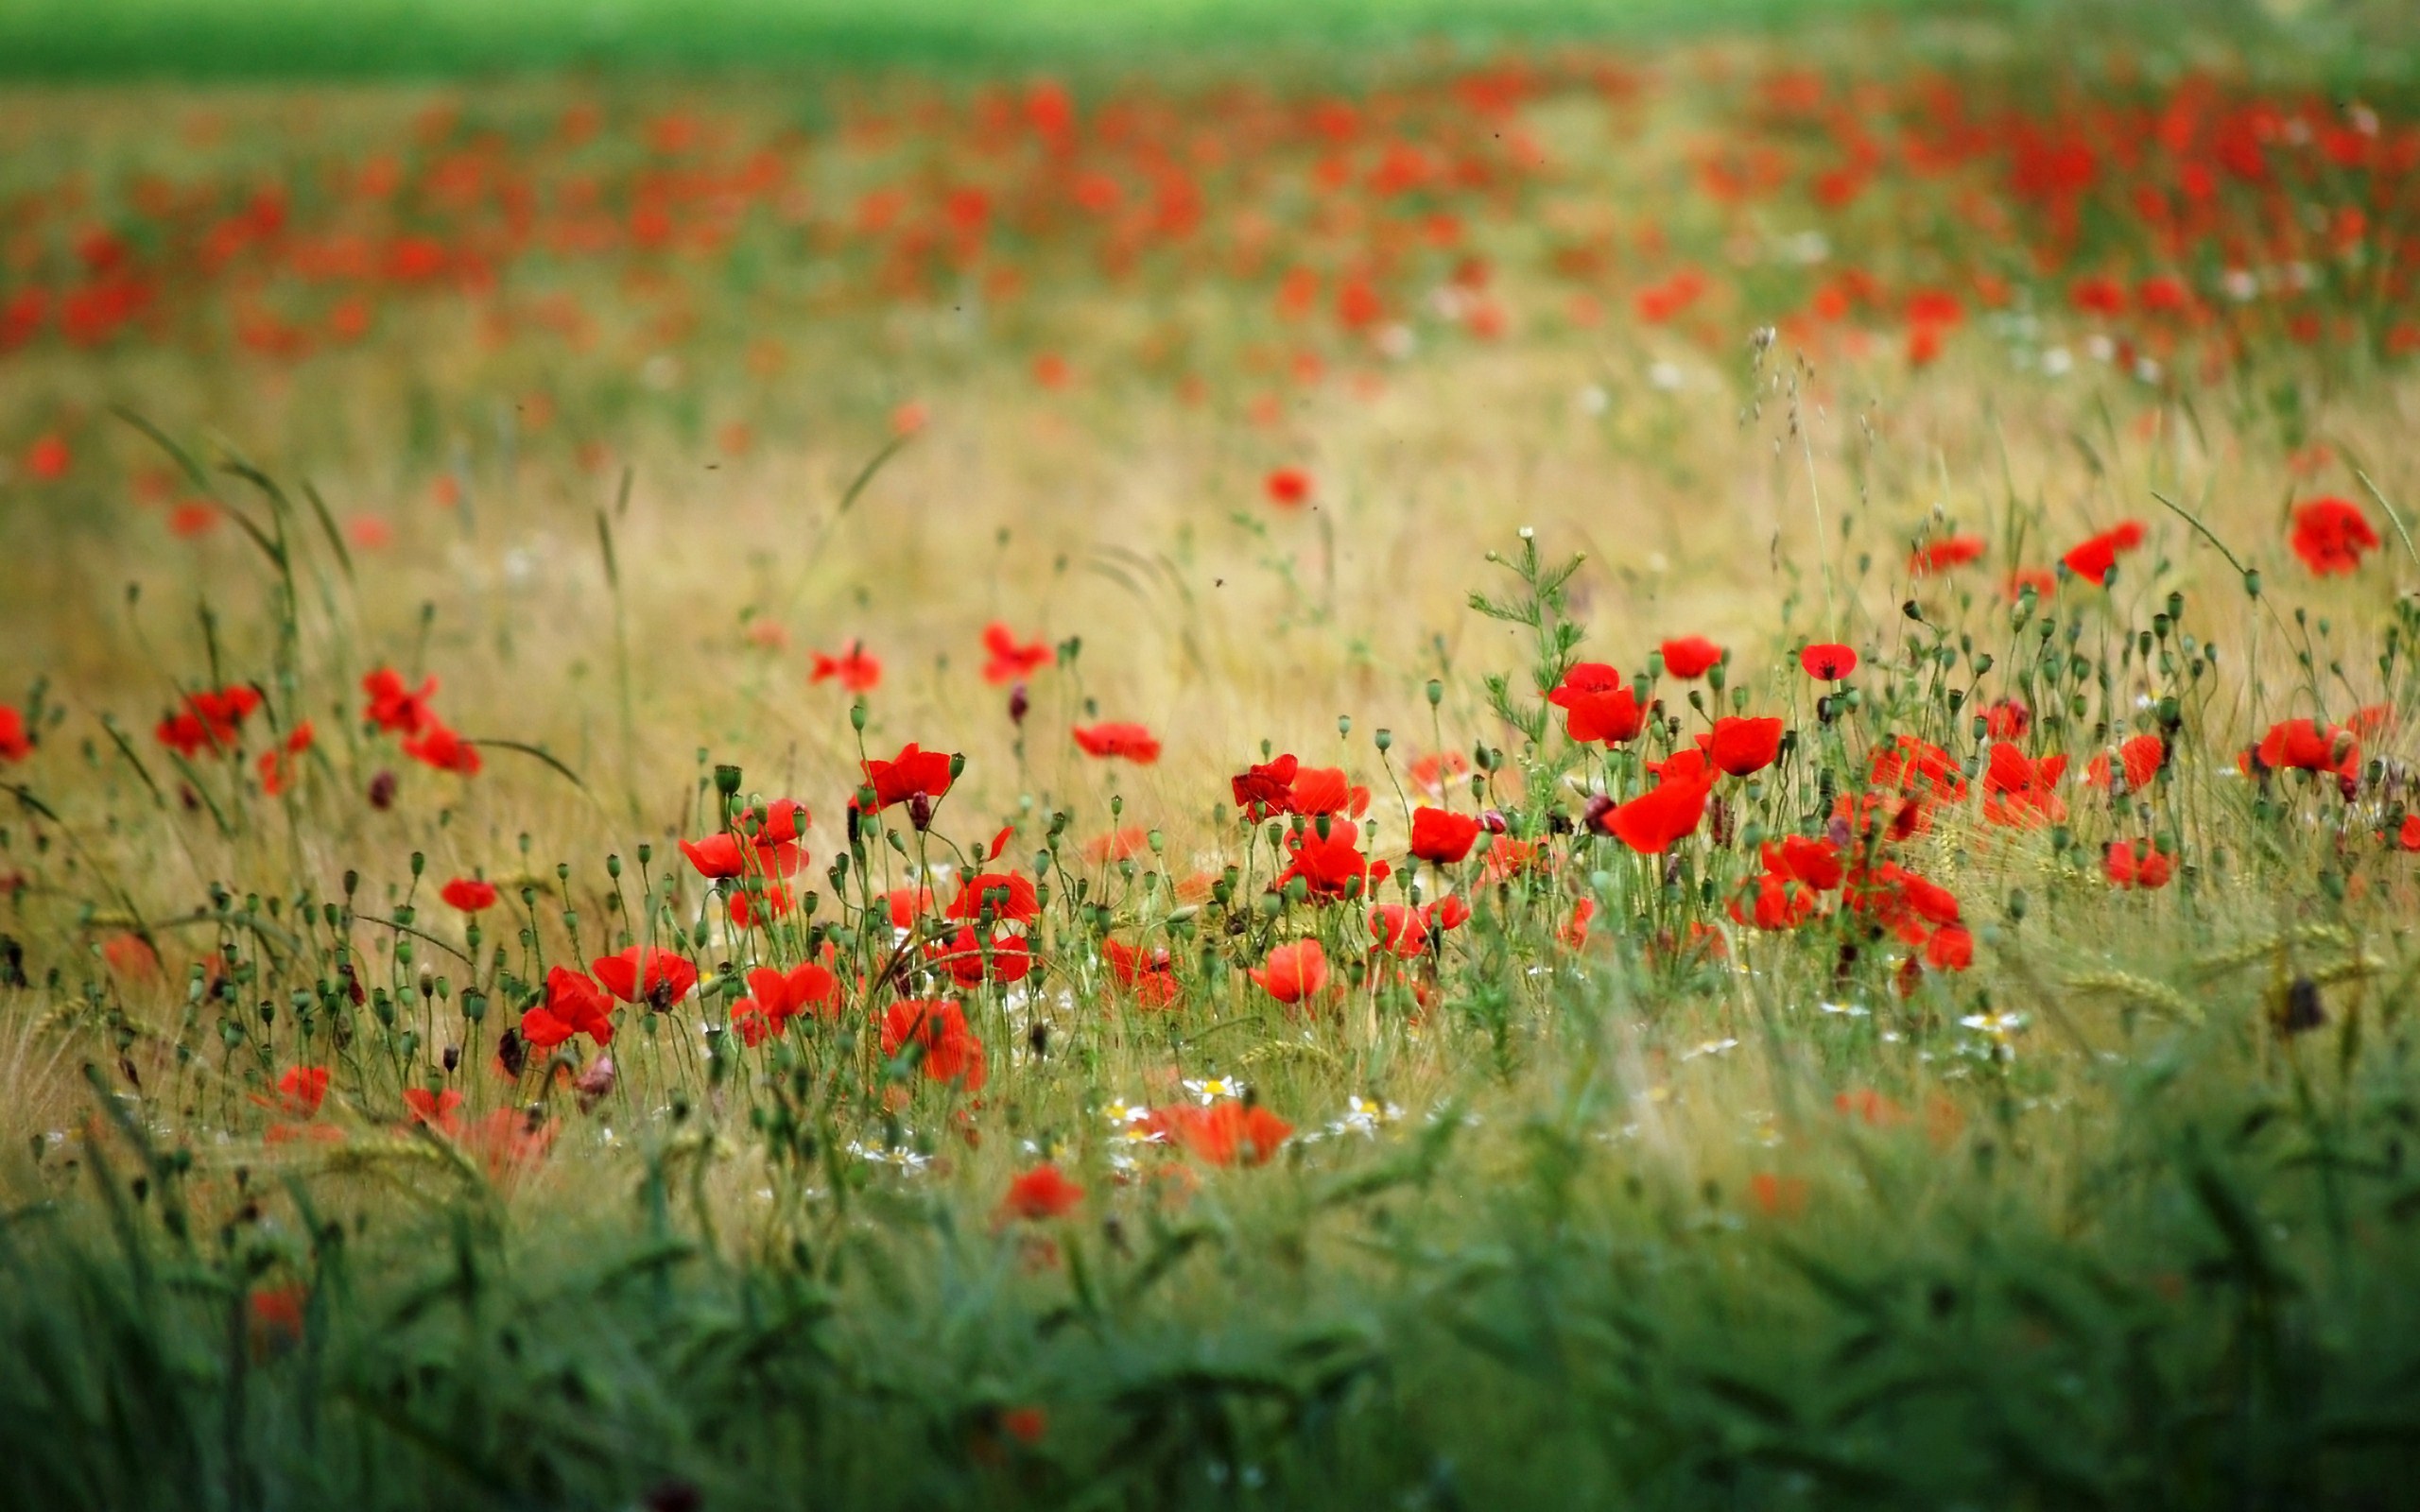 Many red poppy field wallpapers and images - wallpapers, pictures, photos